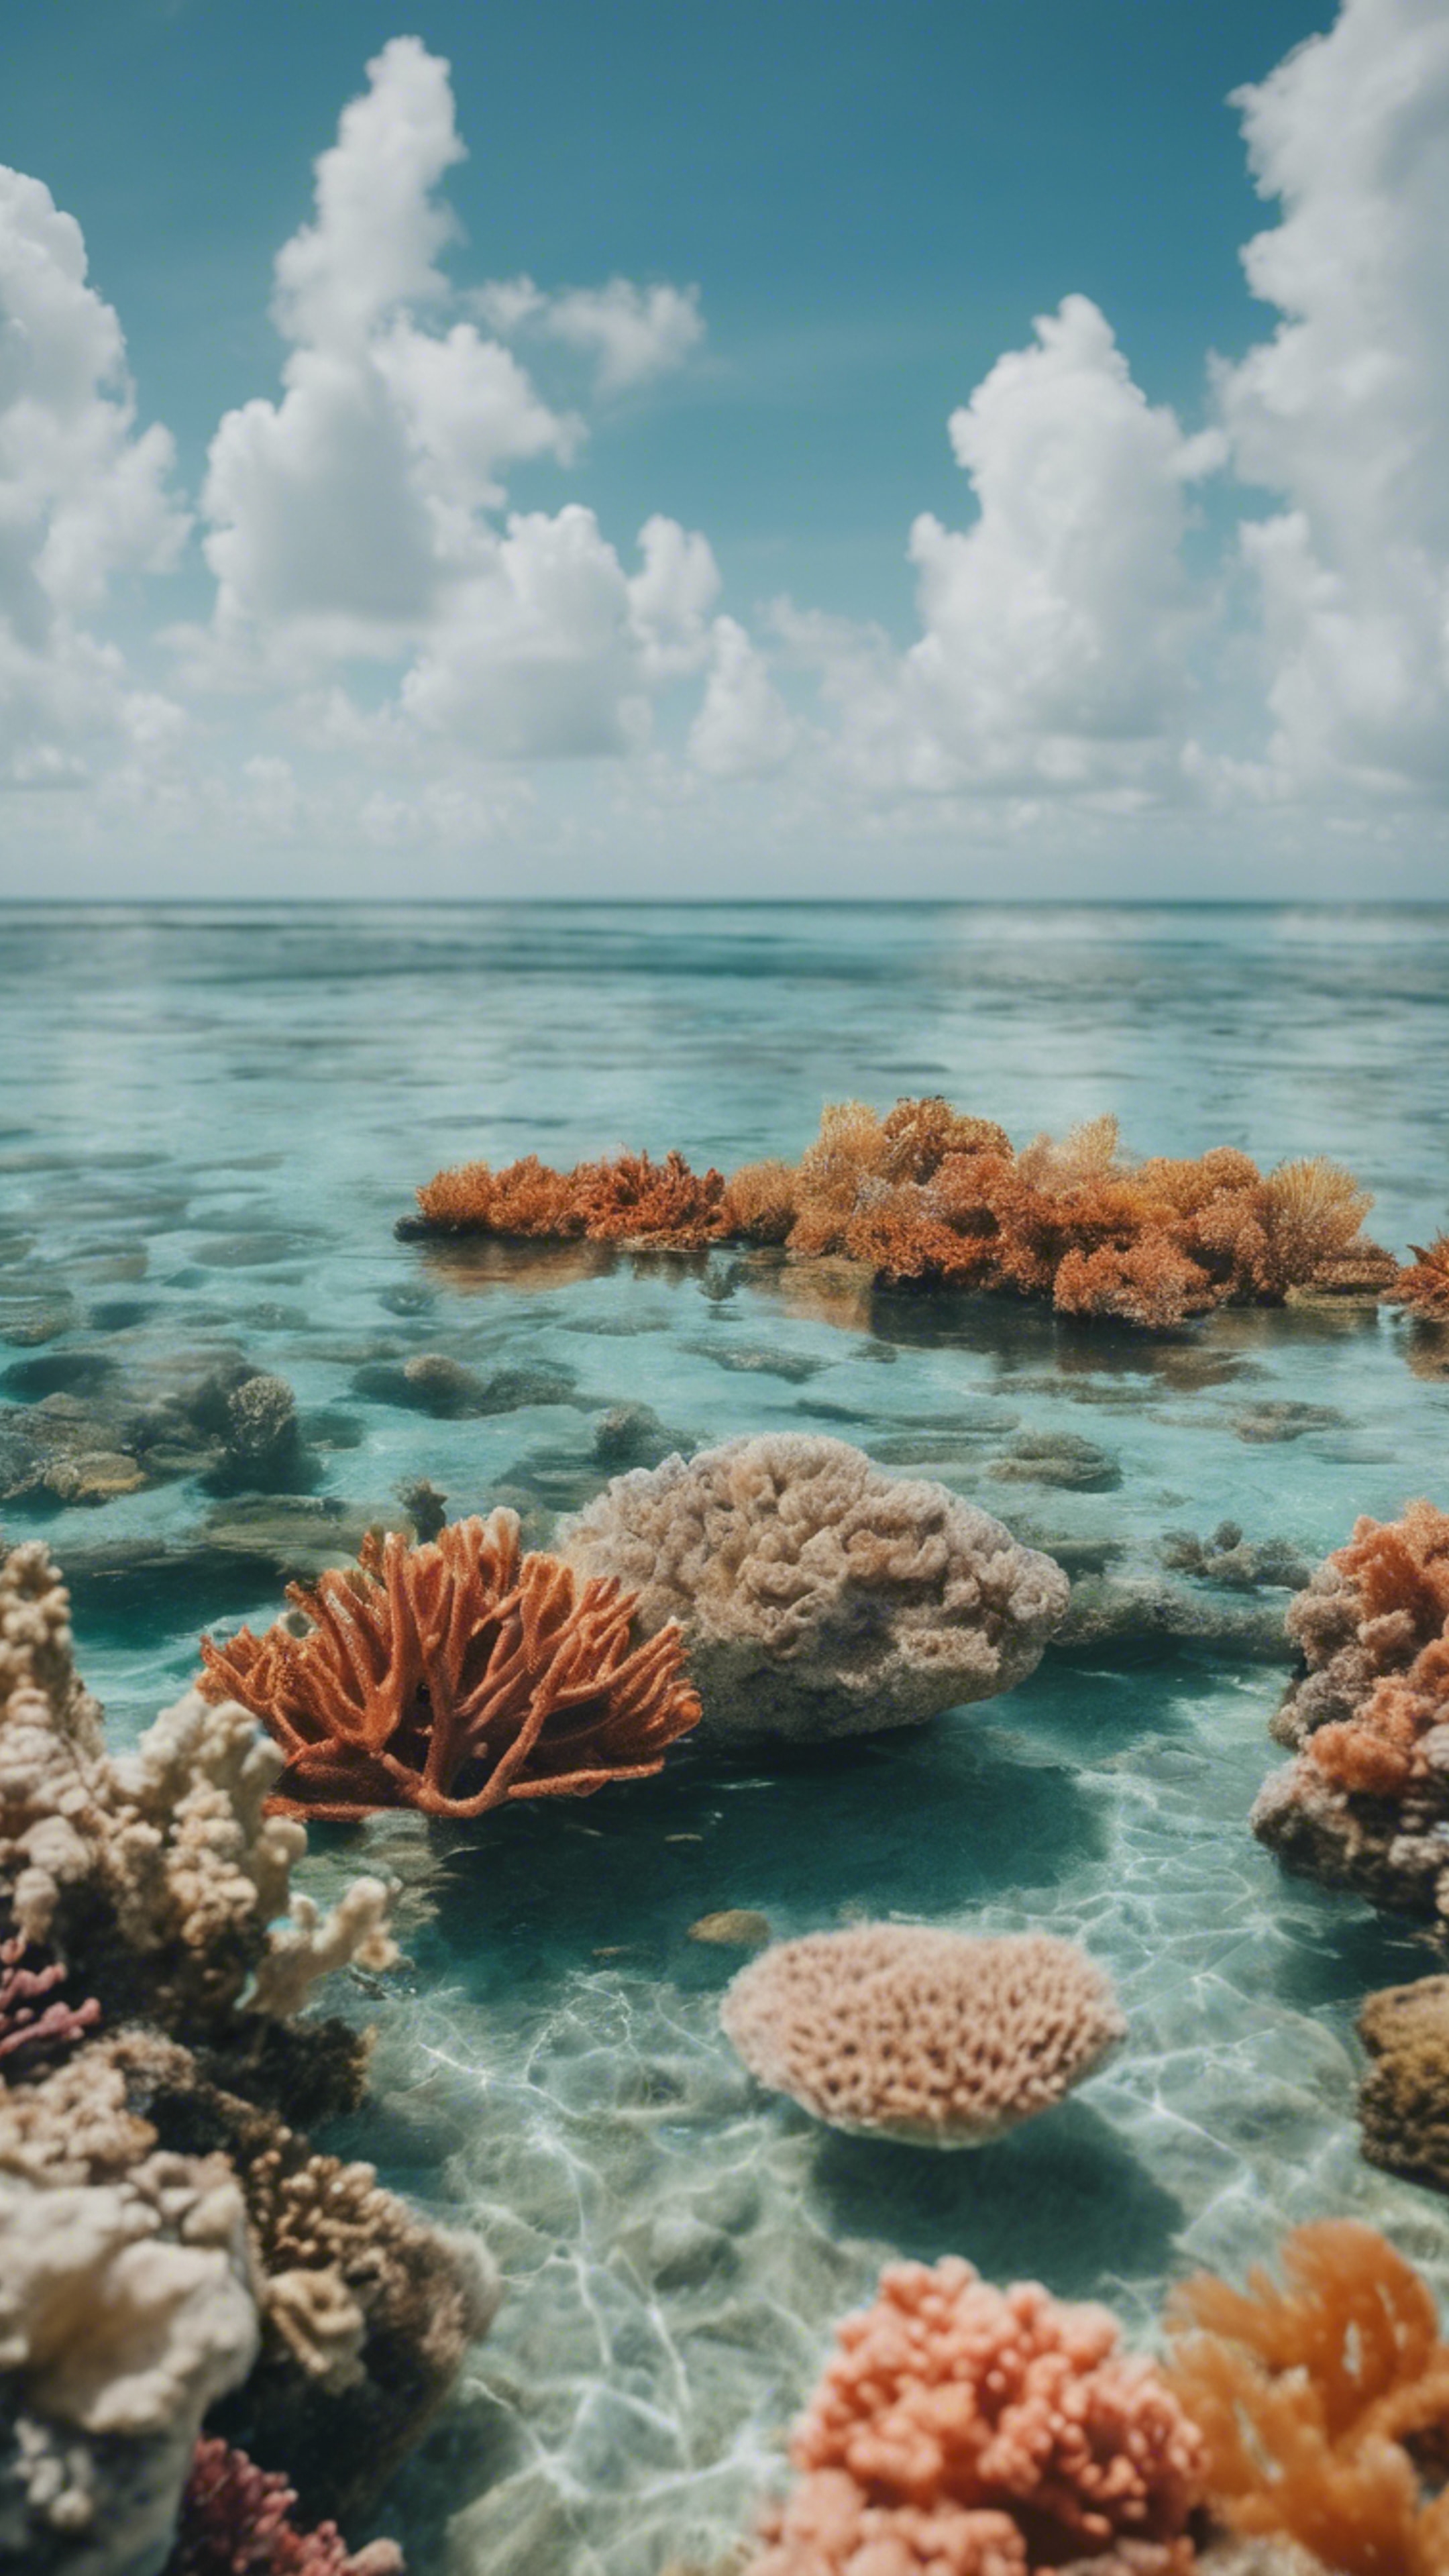 A serene view of the Florida Keys with crystal clear water and a colorful coral reef visible underwater. Ταπετσαρία[53a9c37260d942df83c4]